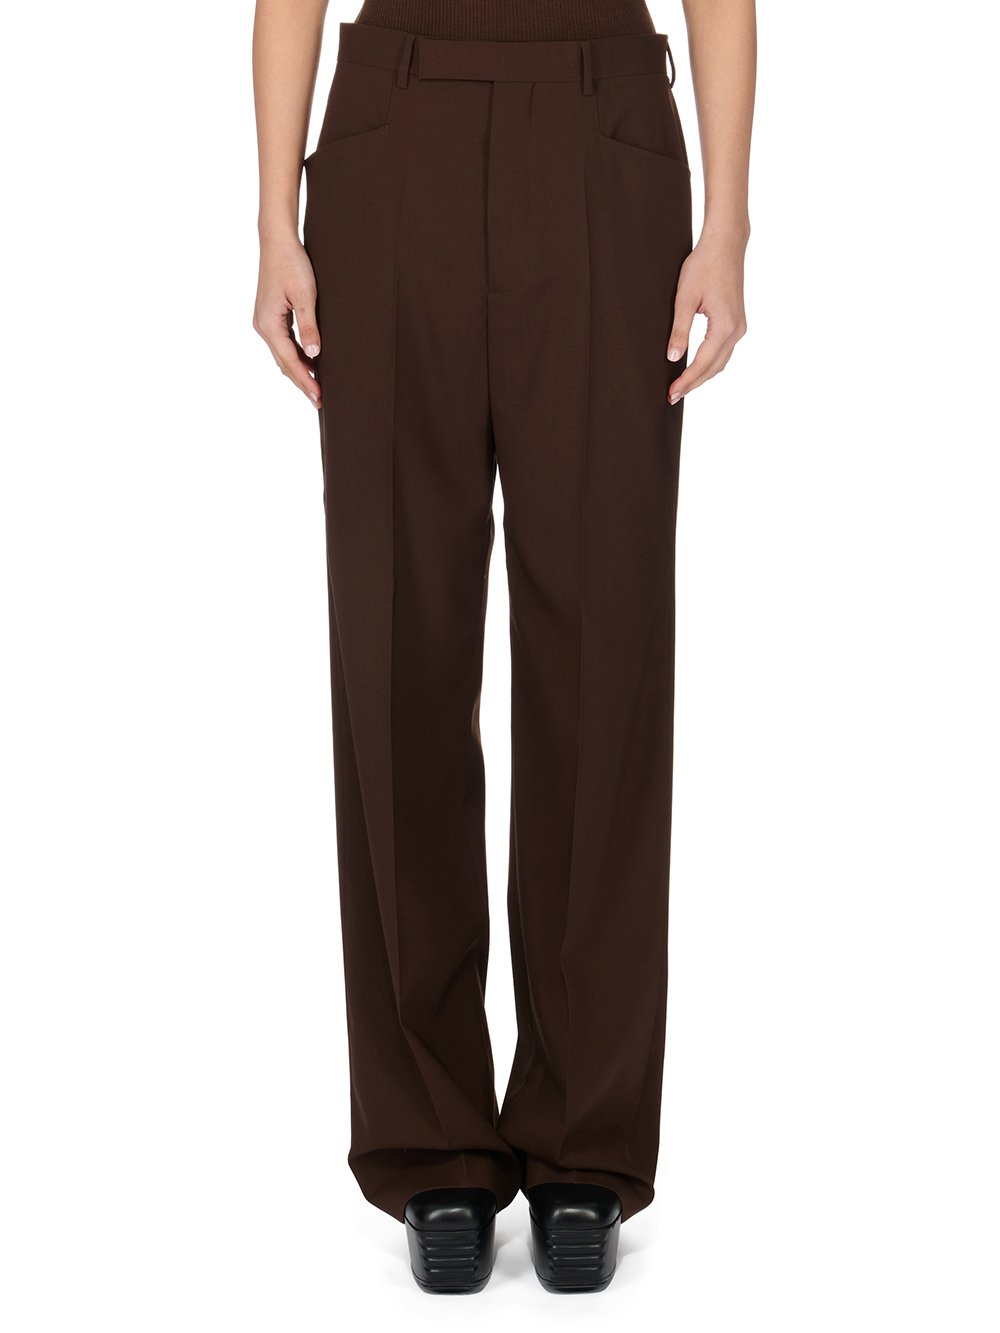 RICK OWENS FW23 LUXOR MASTODON TROUSERS IN BROWN PAPER FINISH WOOL